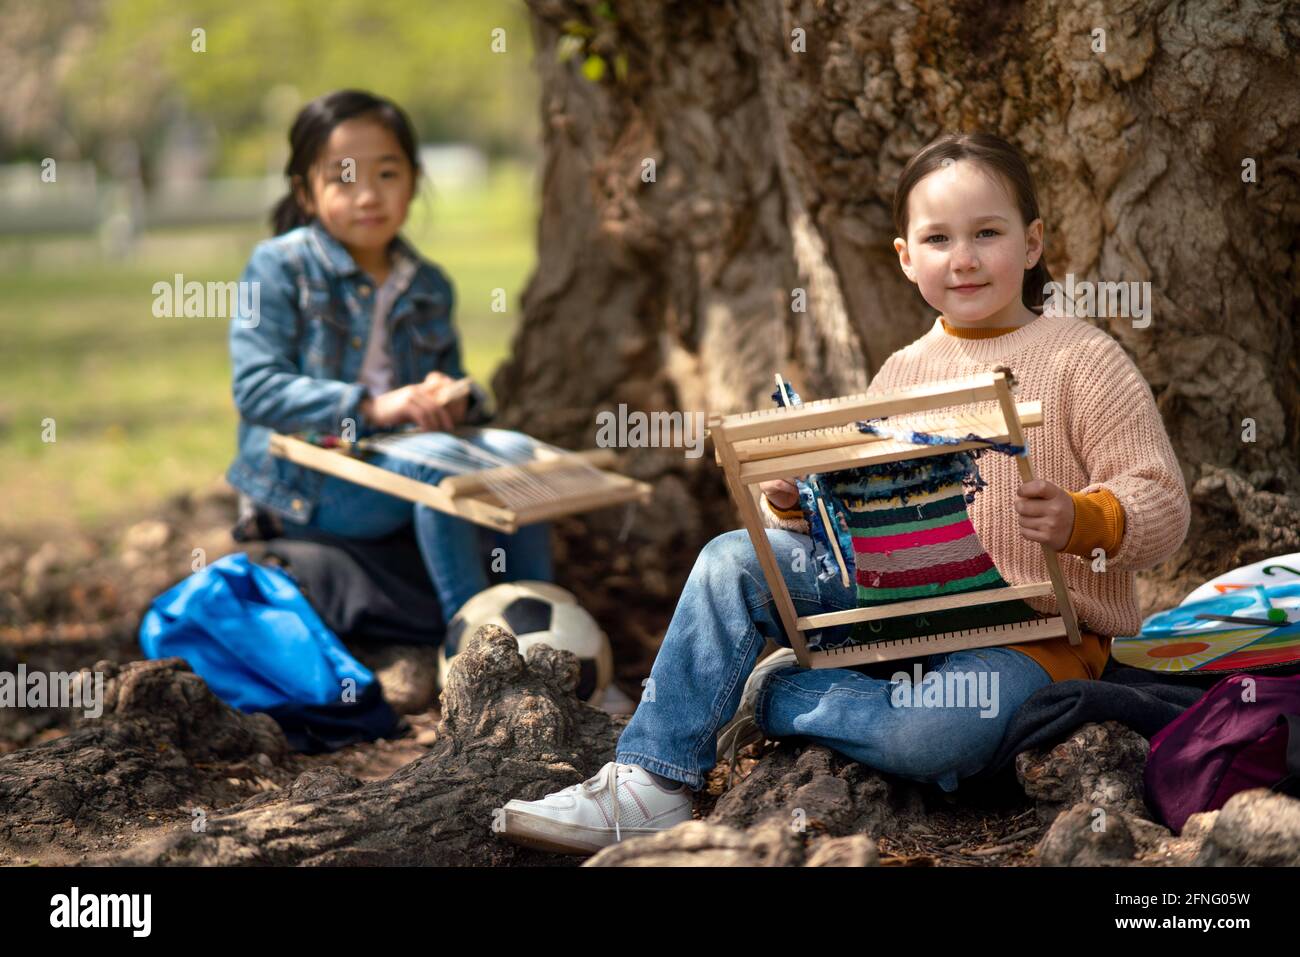 Small children with hand loom sitting outdoors in city park, learning group education concept. Stock Photo